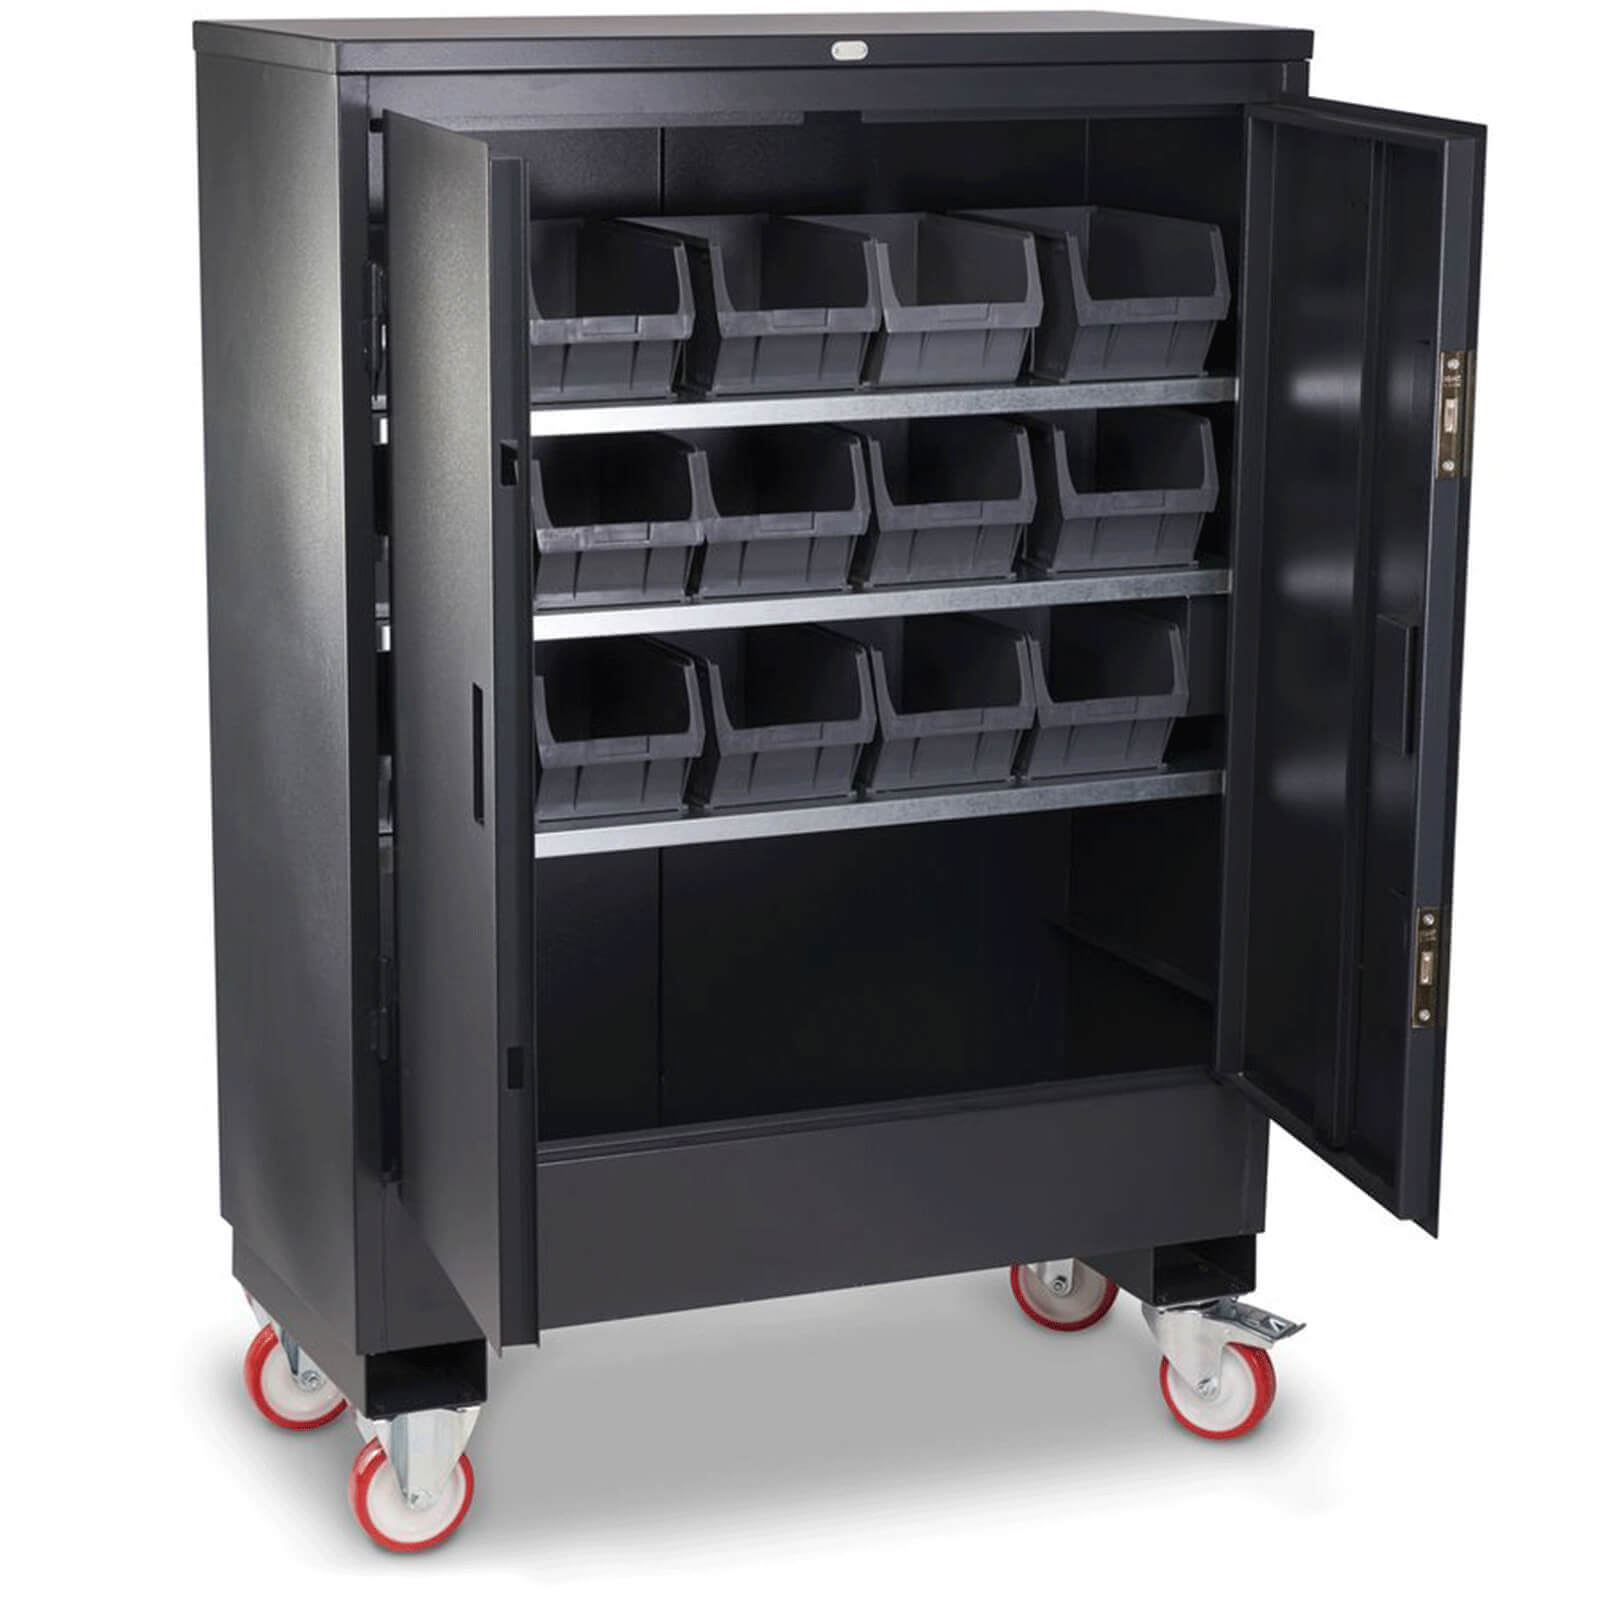 Image of Armorgard Fittingstor Mobile Secure Fittings and Fixings Cabinet 1200mm 550mm 1750mm